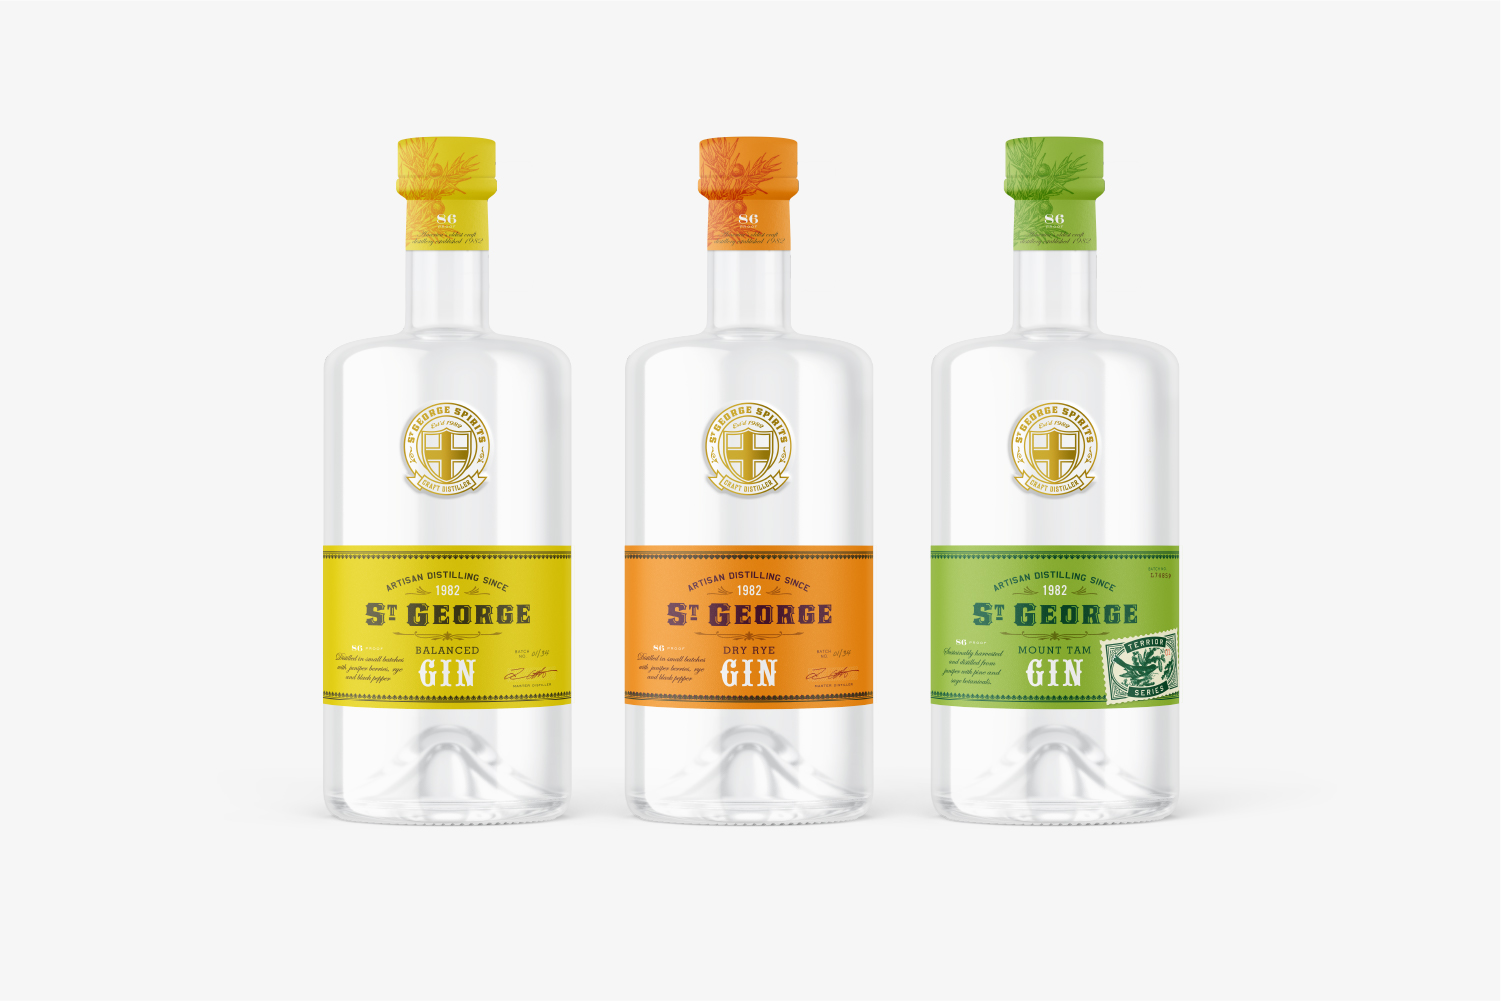 St. George Spirits Trio of Gins packaging design concept.